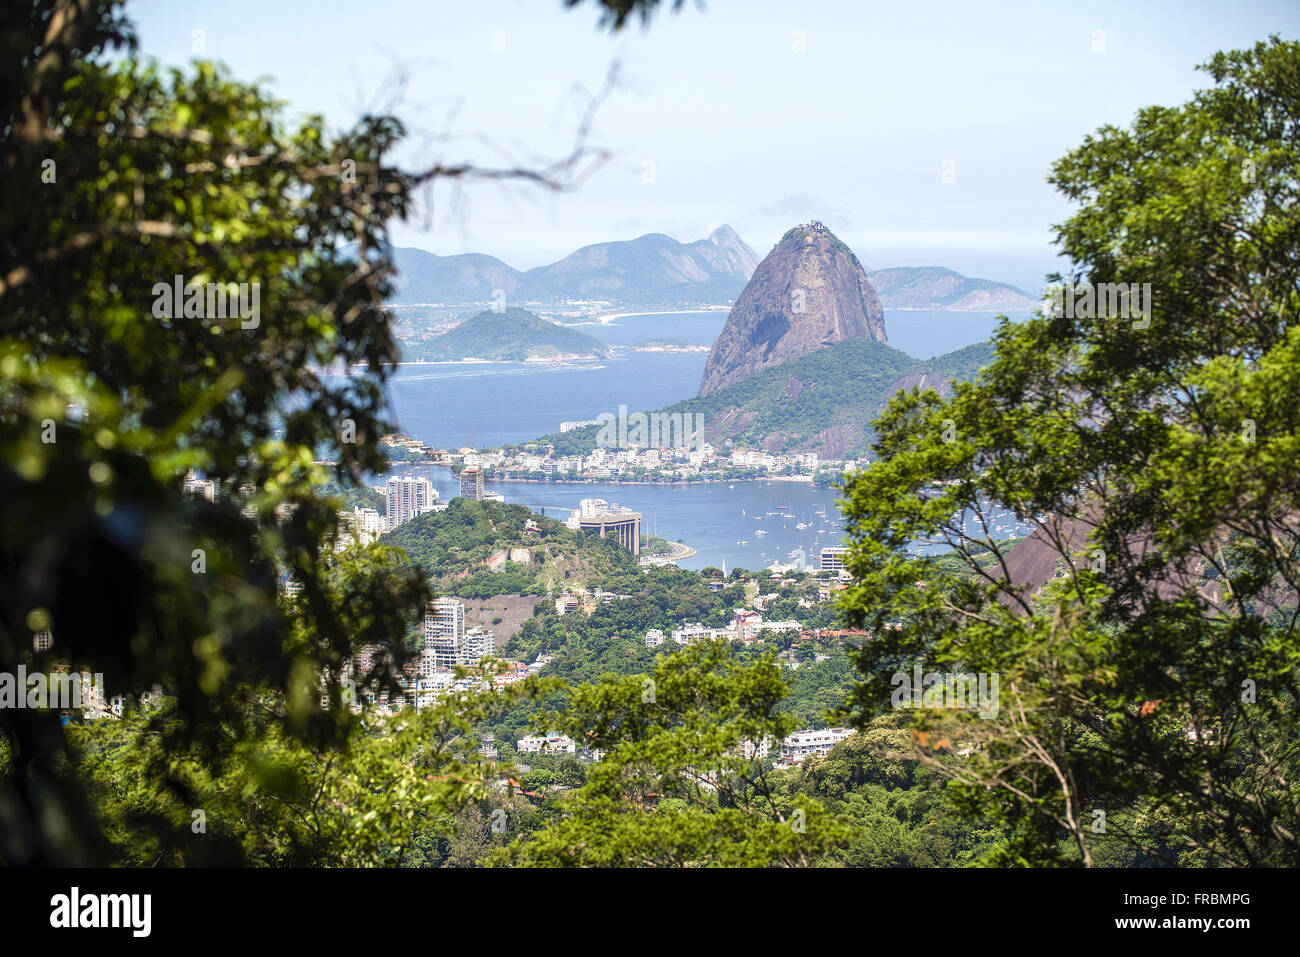 View of the Bay of Botafogo, Pao de Acucar and Morro da Urca from the Sumare Road Stock Photo